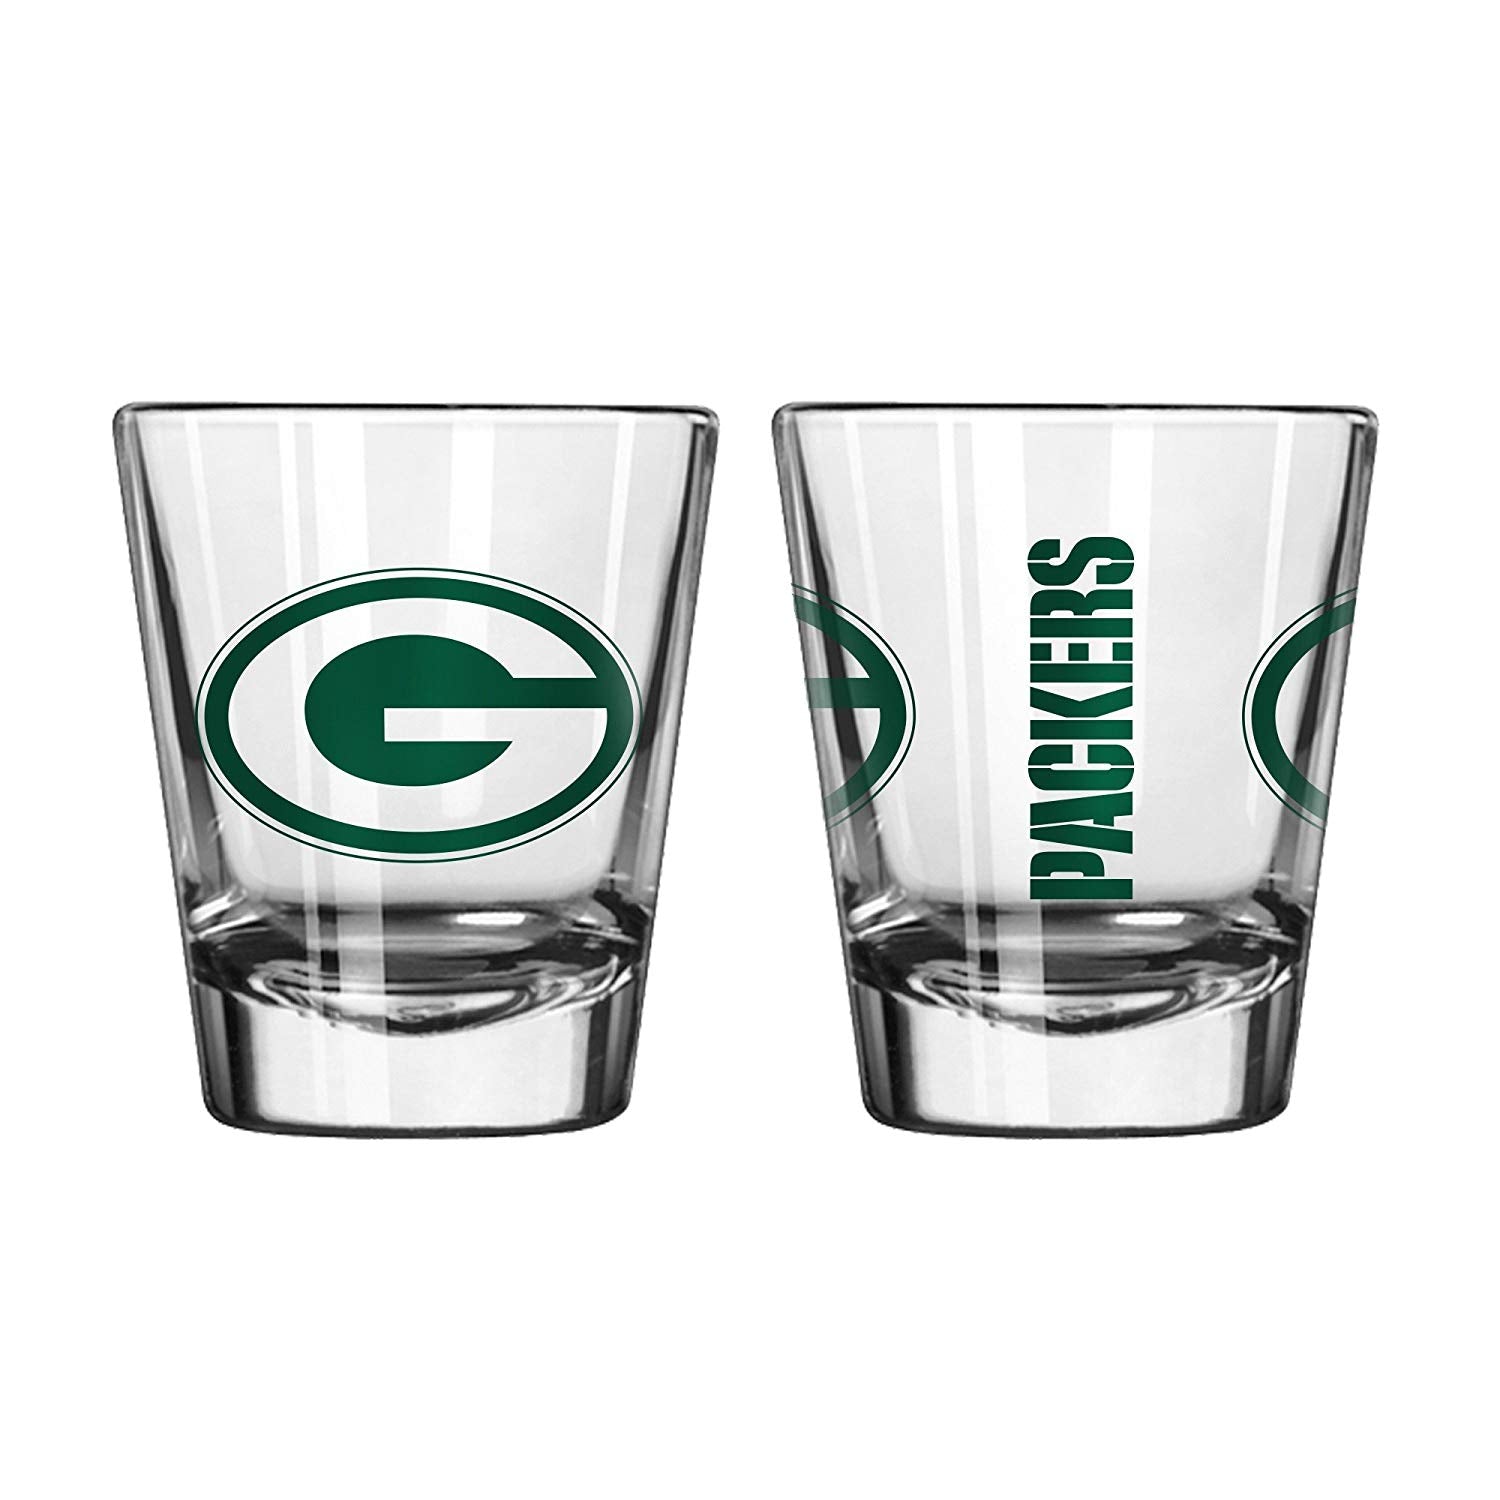 Official Fan Shop Authentic NFL Logo 2 oz Shot Glasses 2-Pack Bundle. Show Team Pride at Home, Your Bar or at The Tailgate. Gameday Shot Glasses for a Goodnight